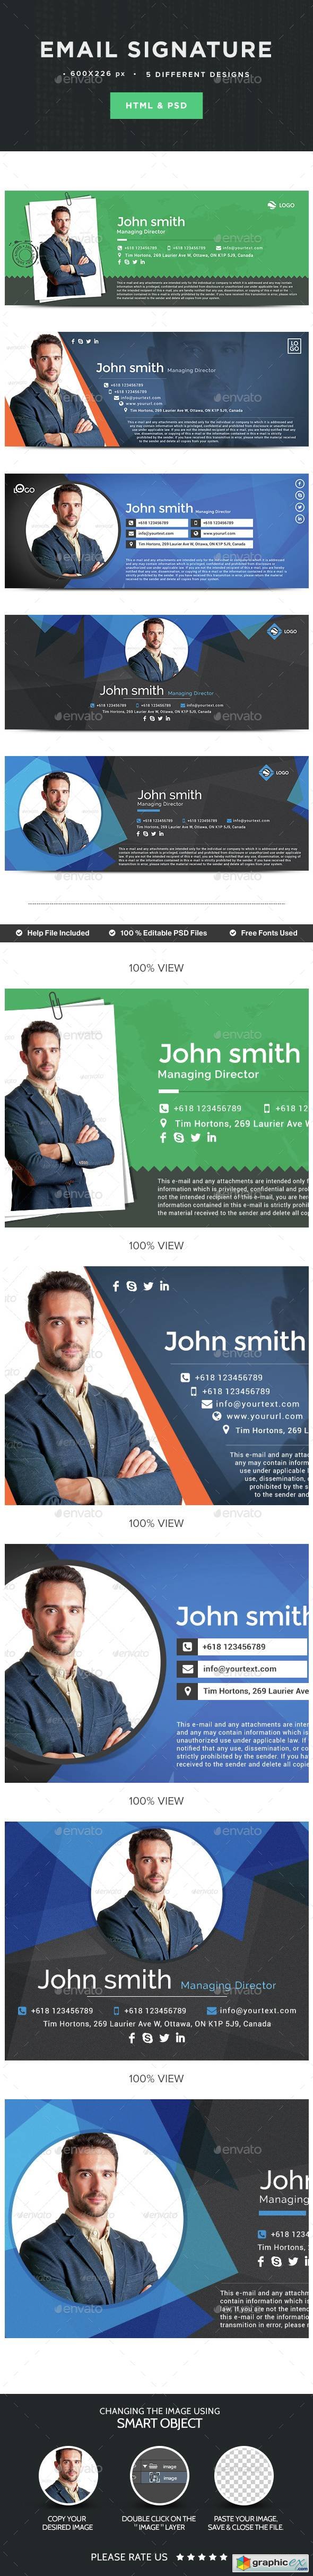 Email Signature - 5 Designs - HTML Files Included